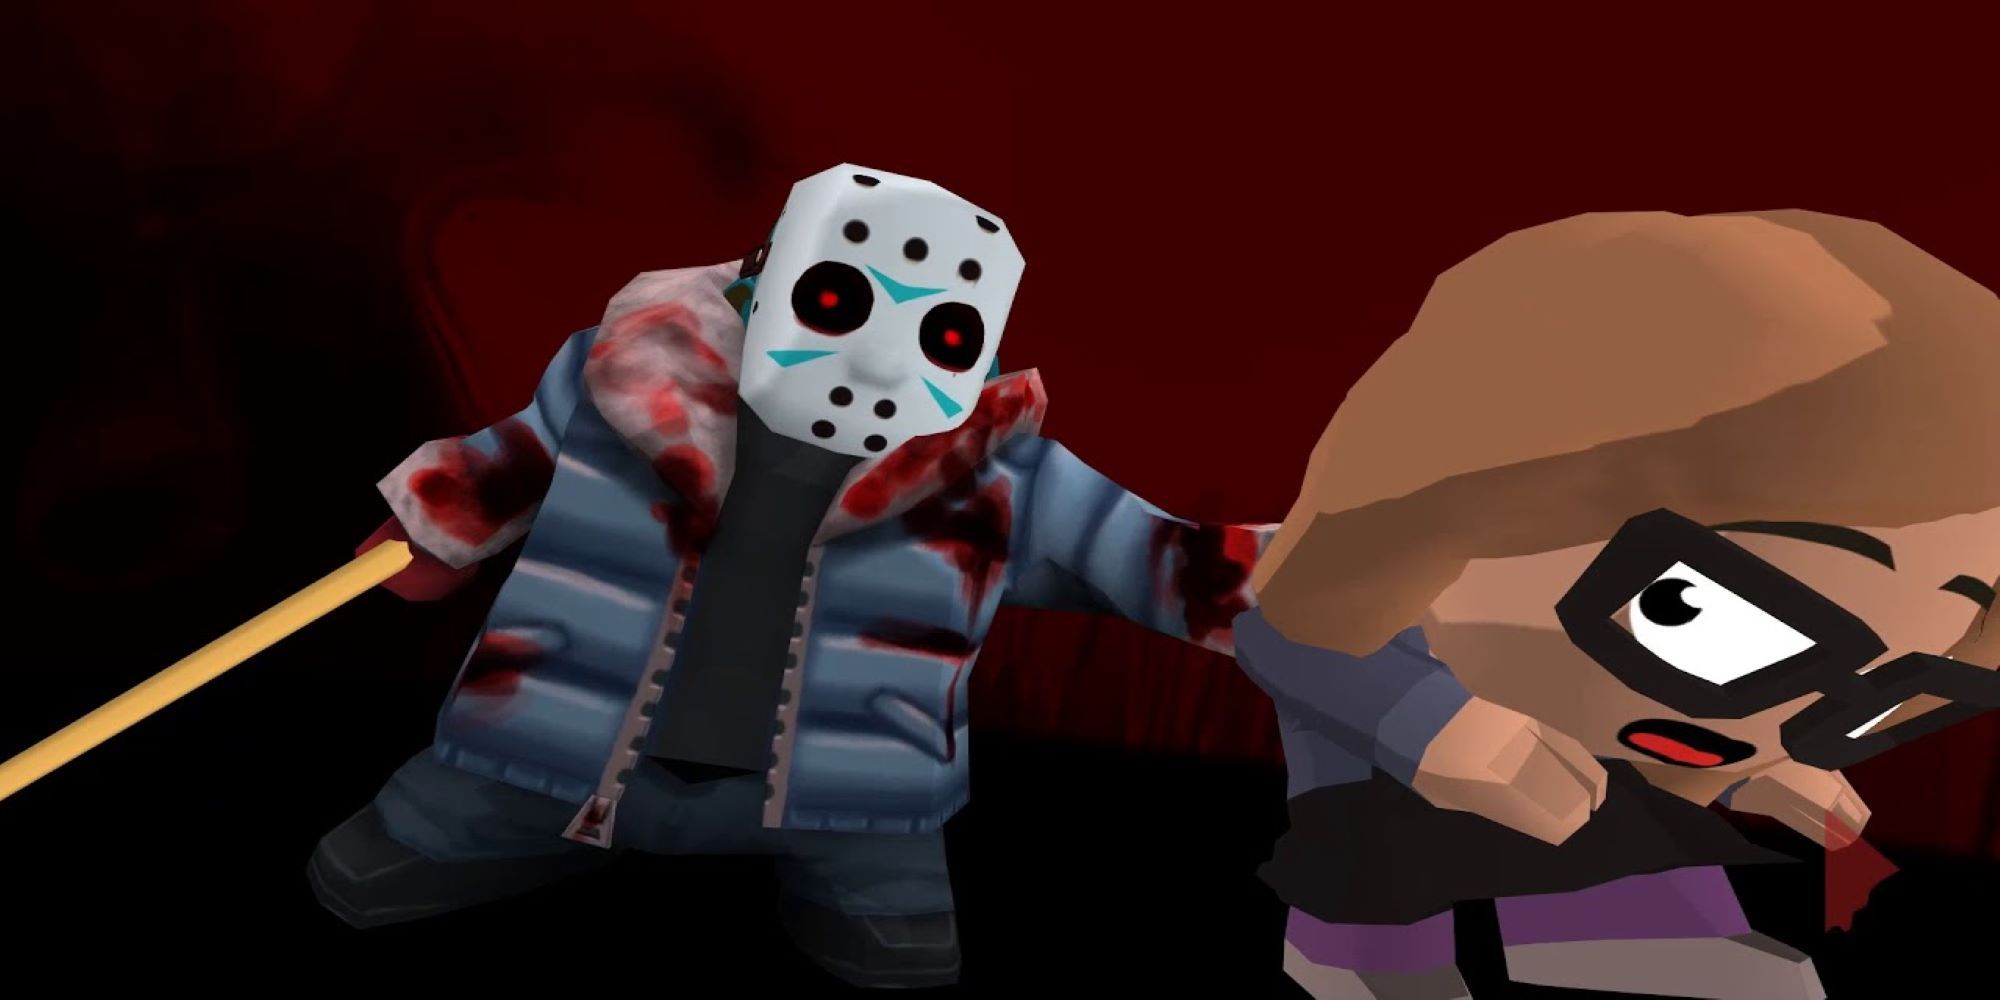 Jason Voorhees murders a bespectacled teenager with a baseball bat in Friday The 13th: Killer Puzzle.